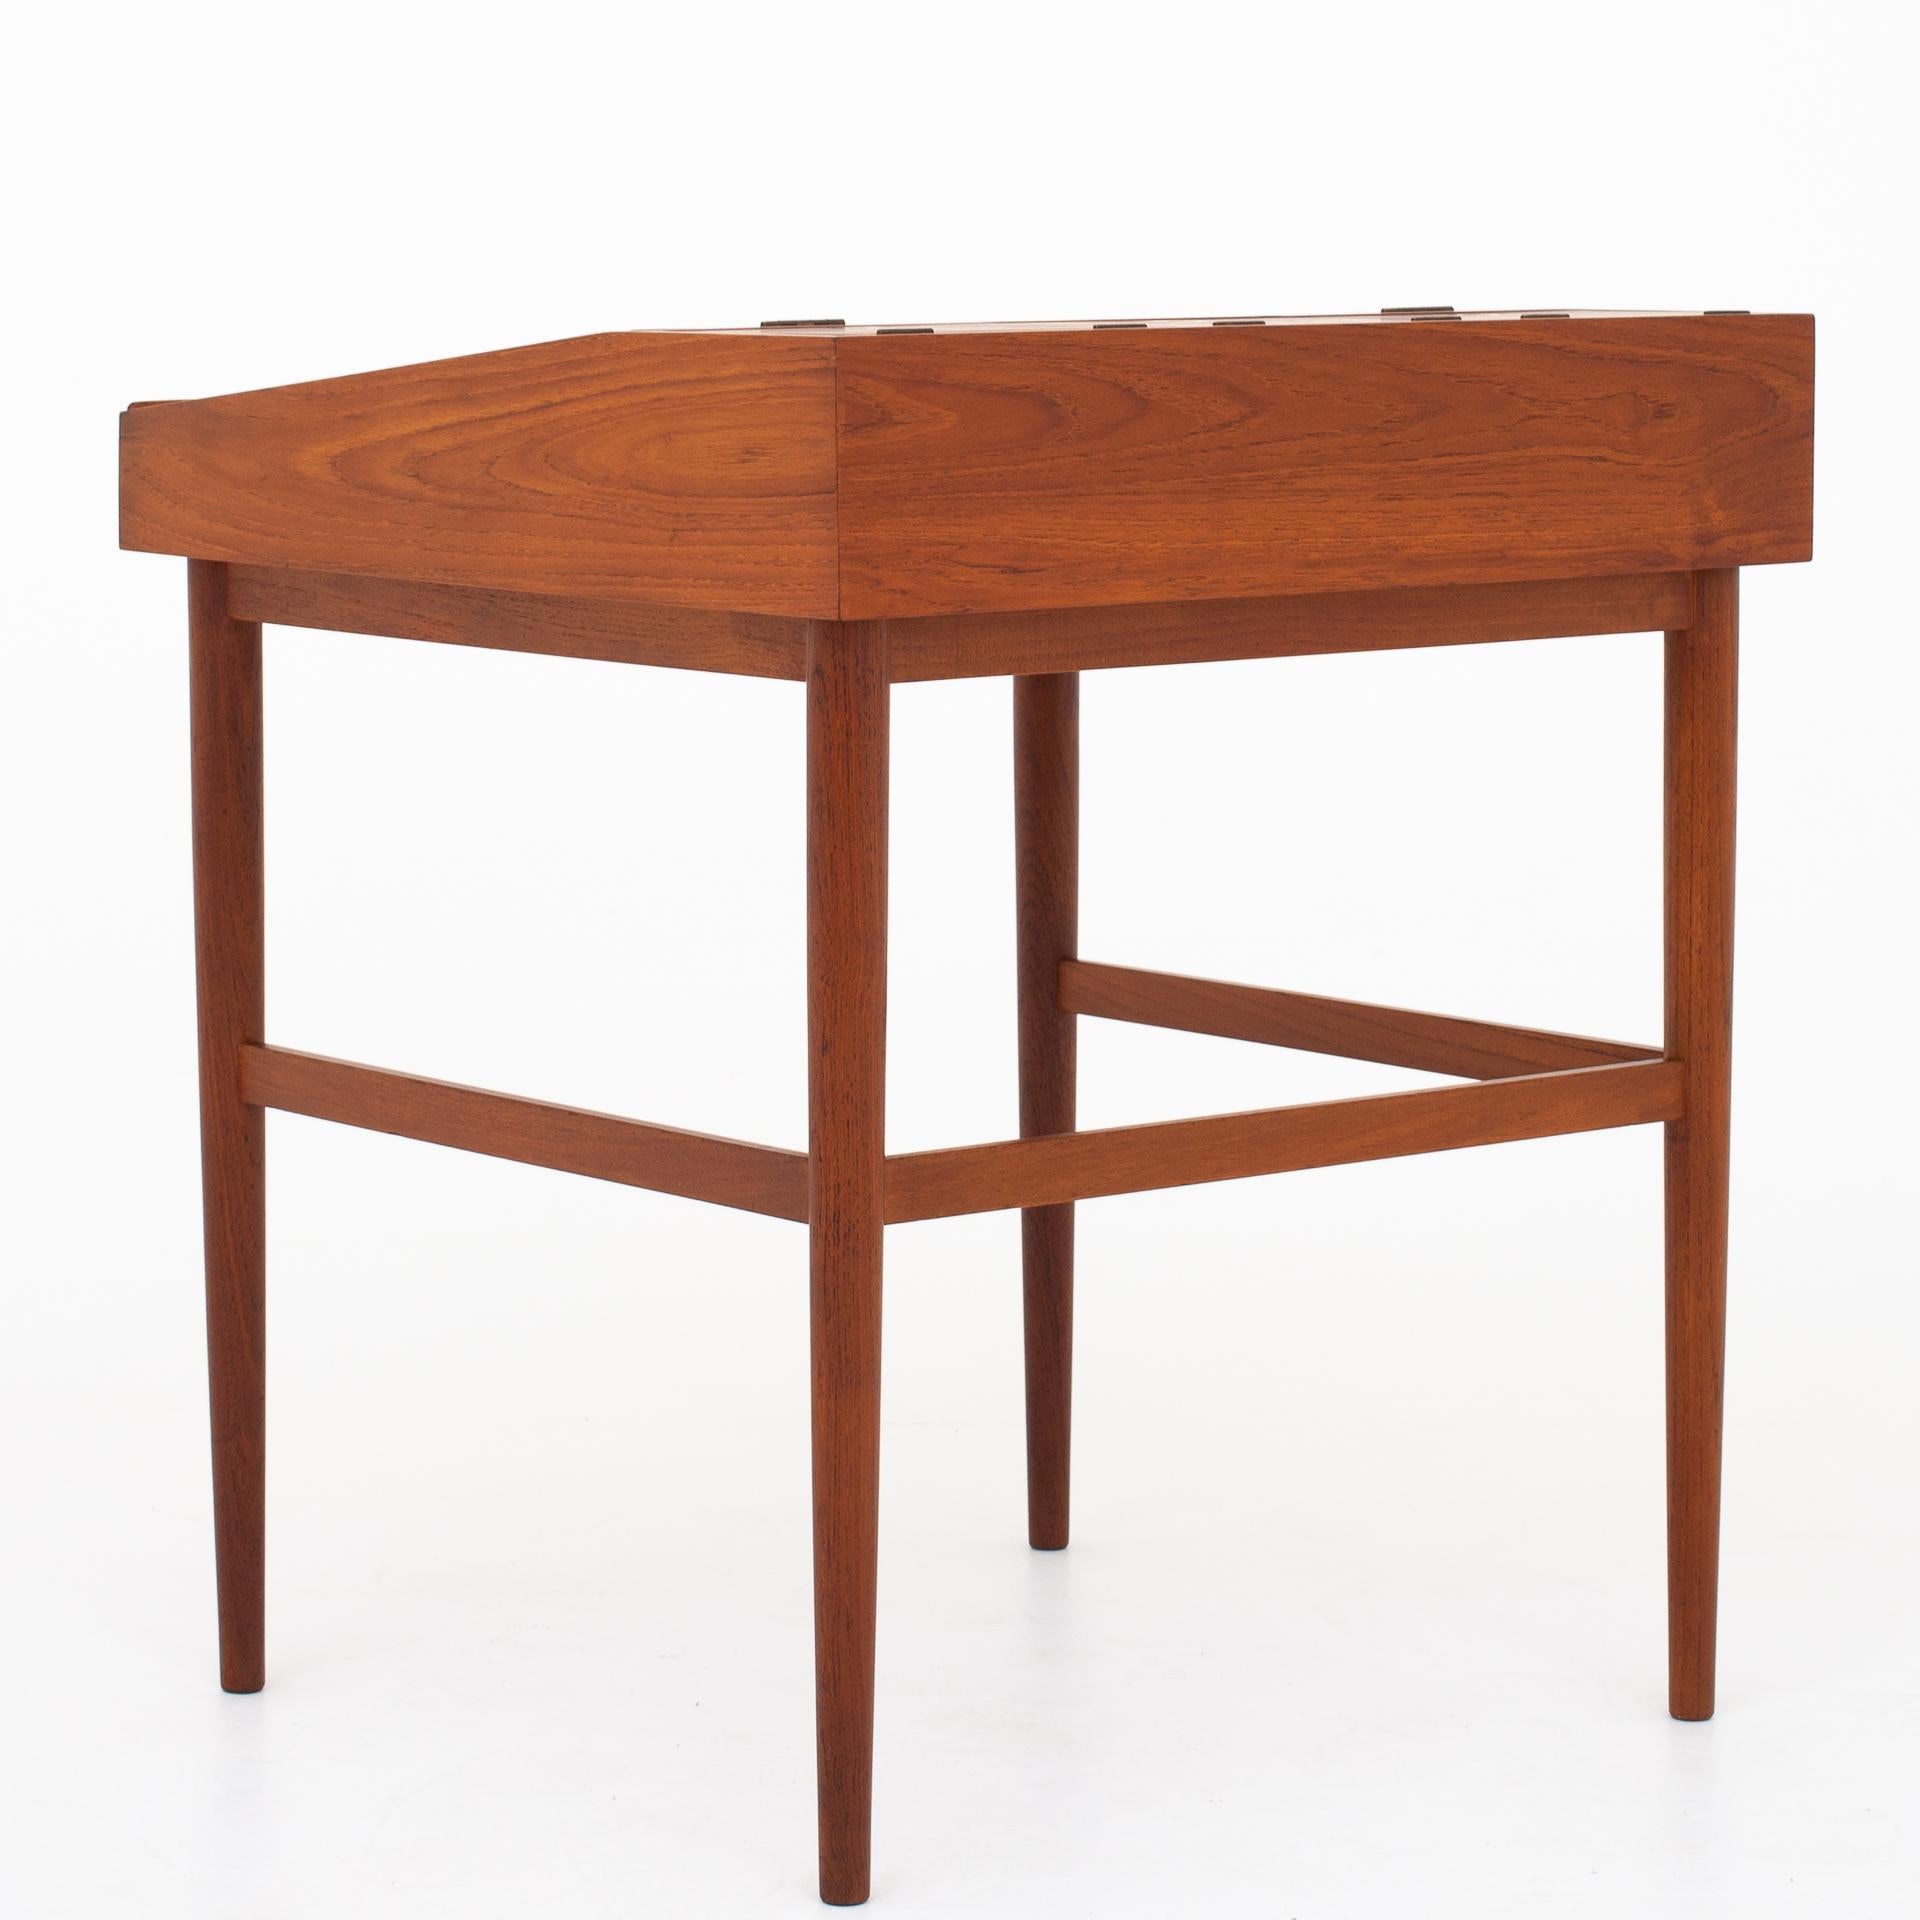 NV 40, writing desk made of teak, large writing plate with handle of a slightly keeled edge, three smaller plates with handles of brass. Maker Niels Vodder.